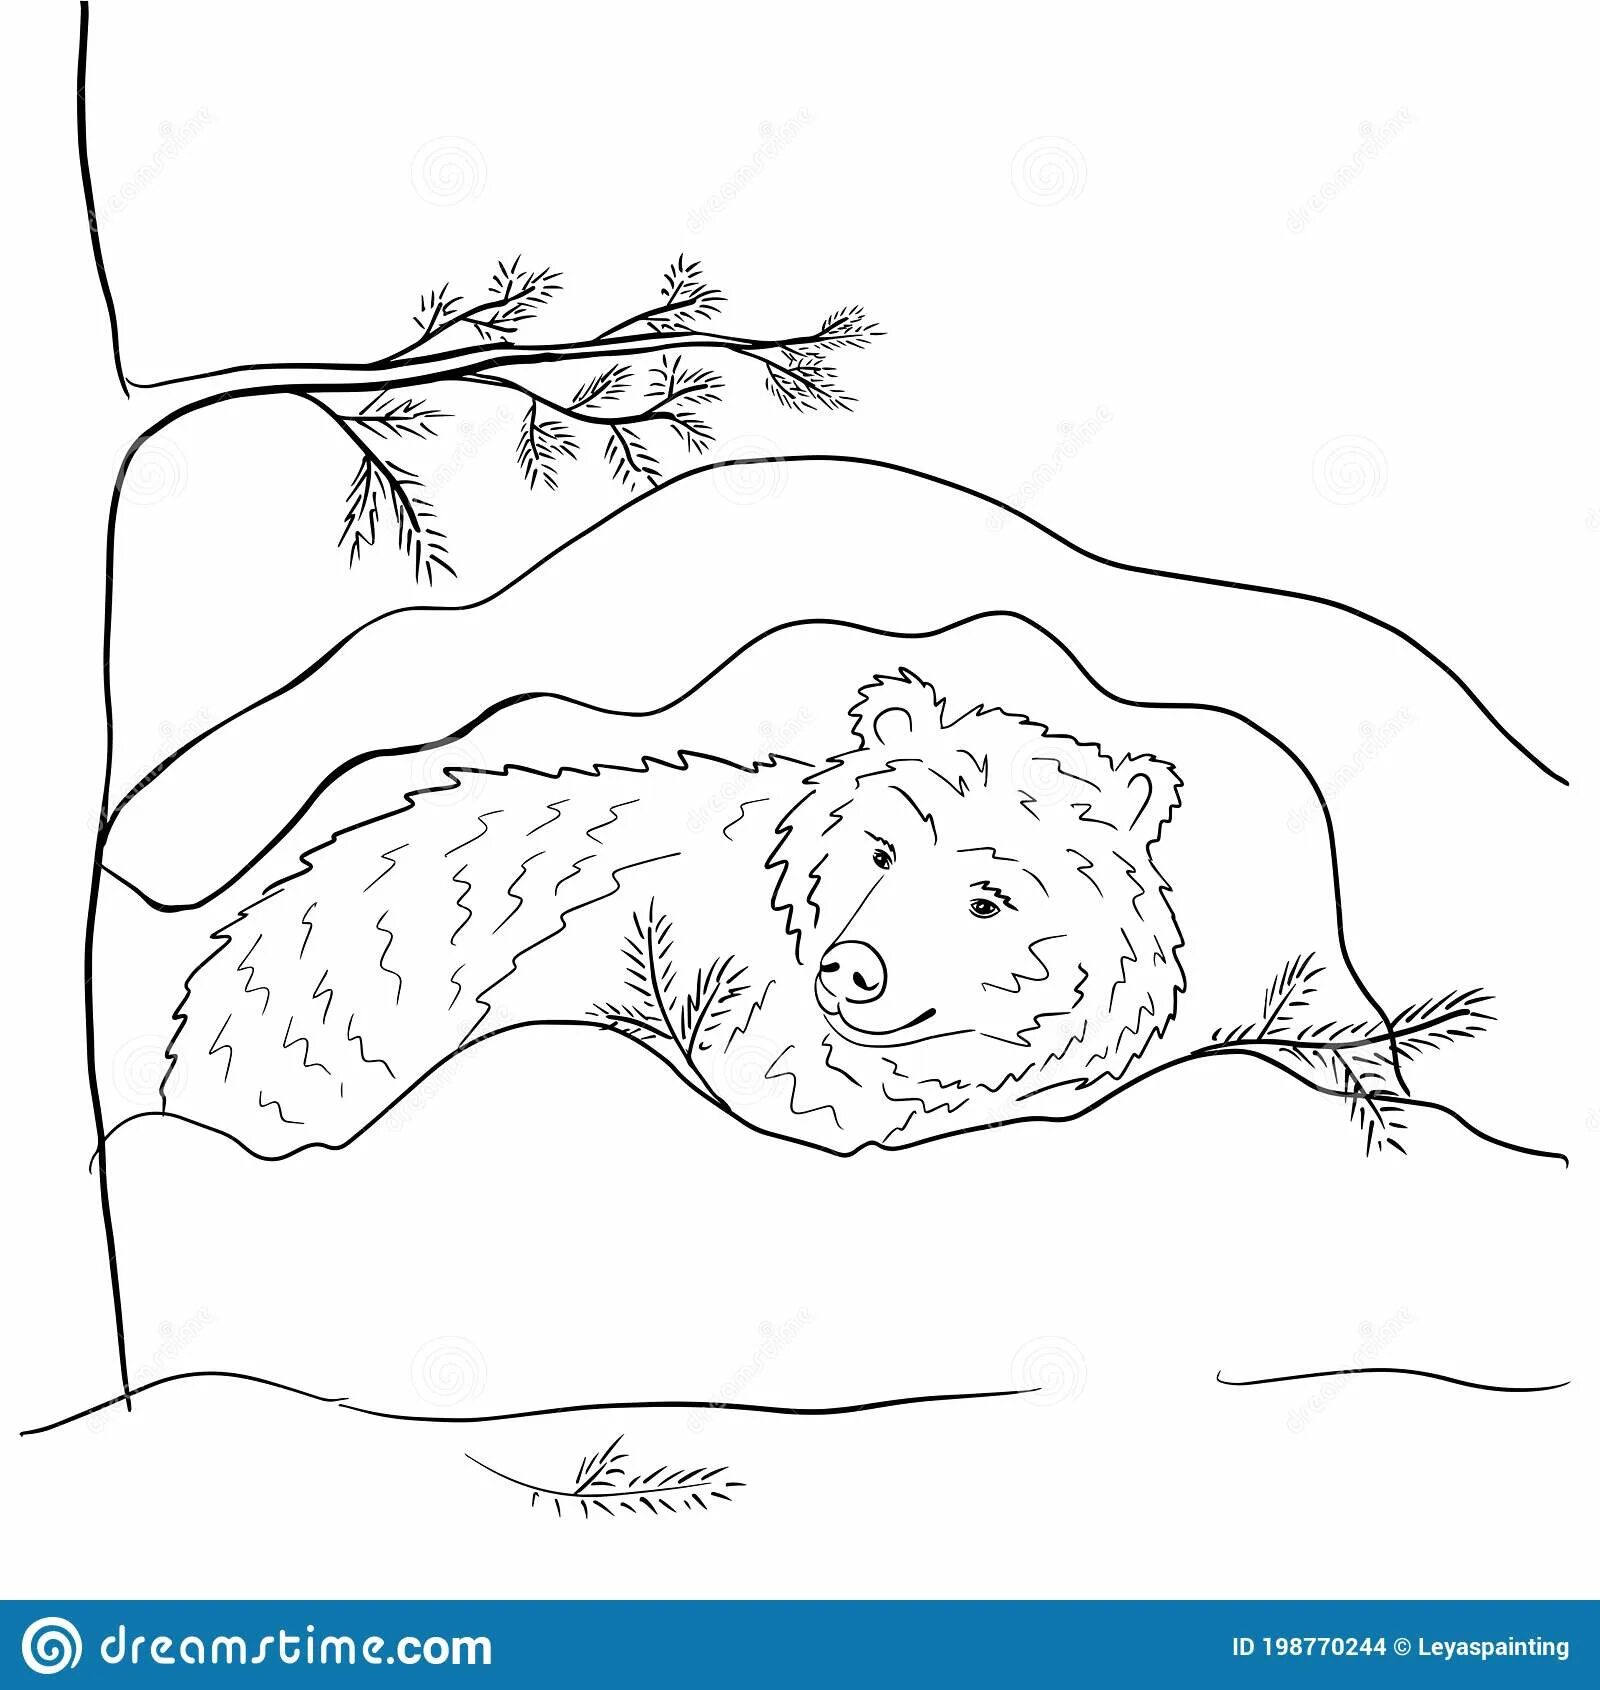 Sleeping bear in winter coloring page